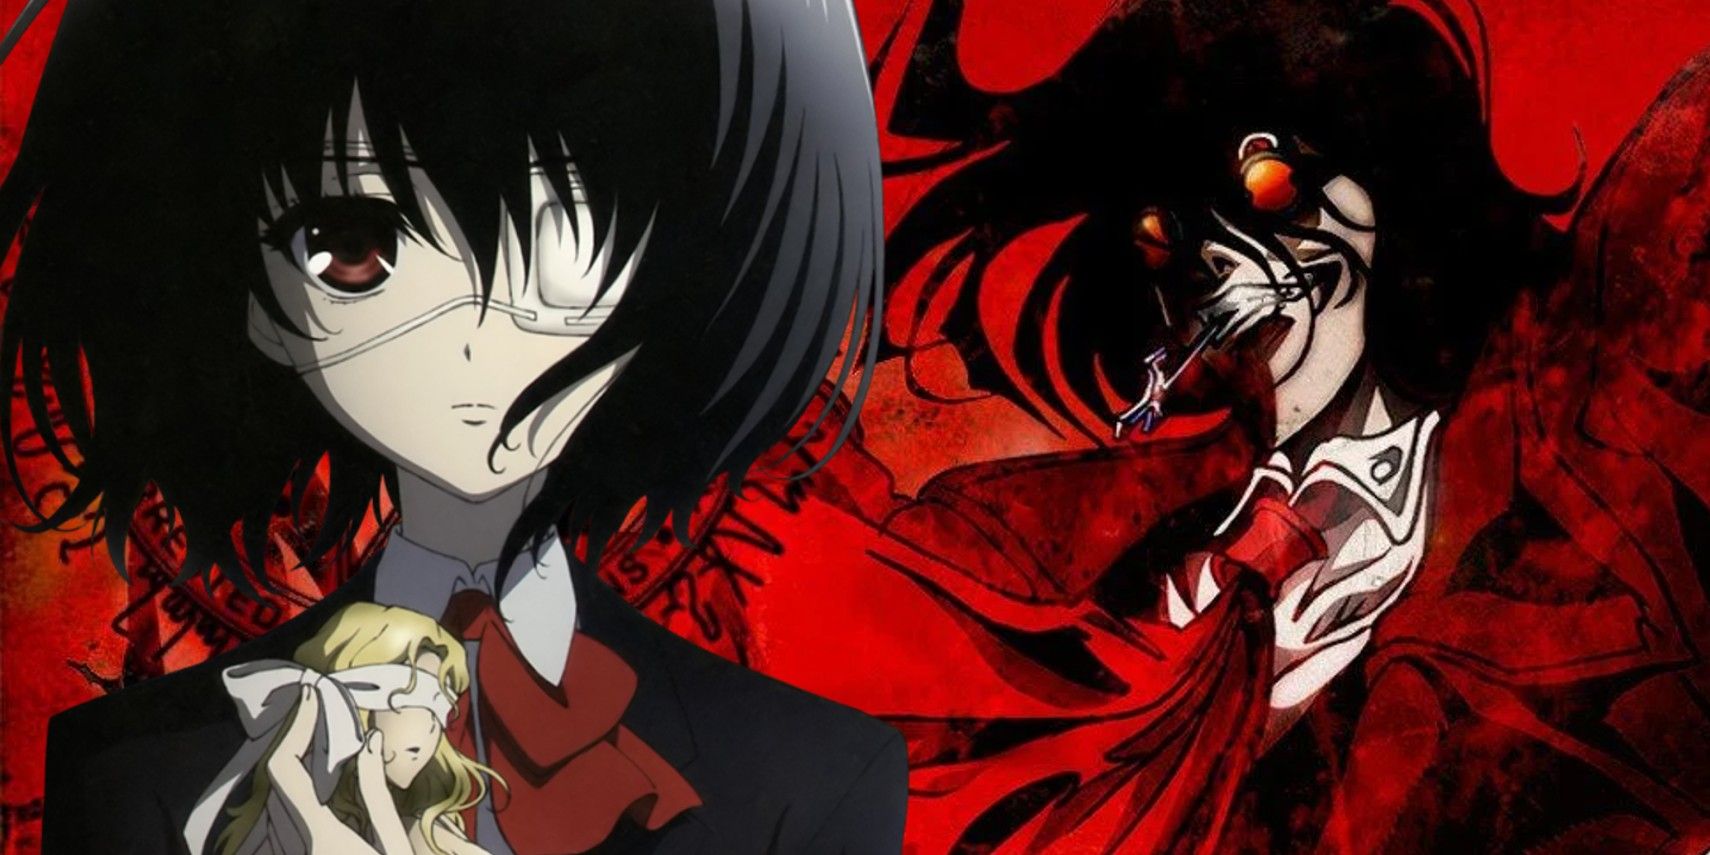 10 Horror Anime Series That Are More Bloody Than Scary